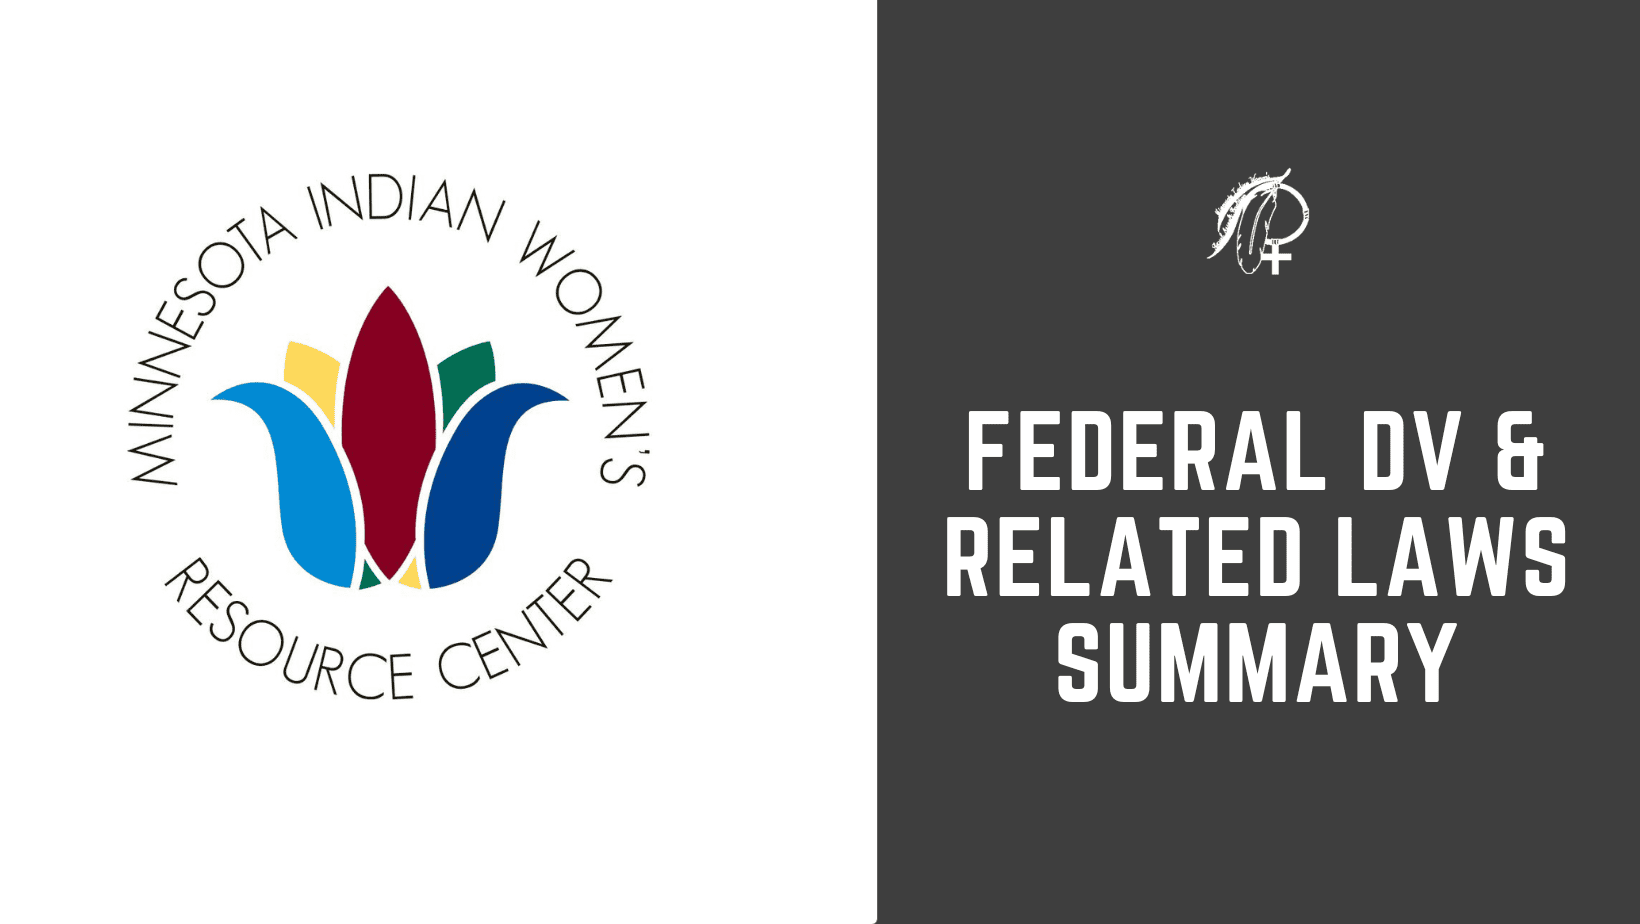 Federal DV & Related Laws Summary